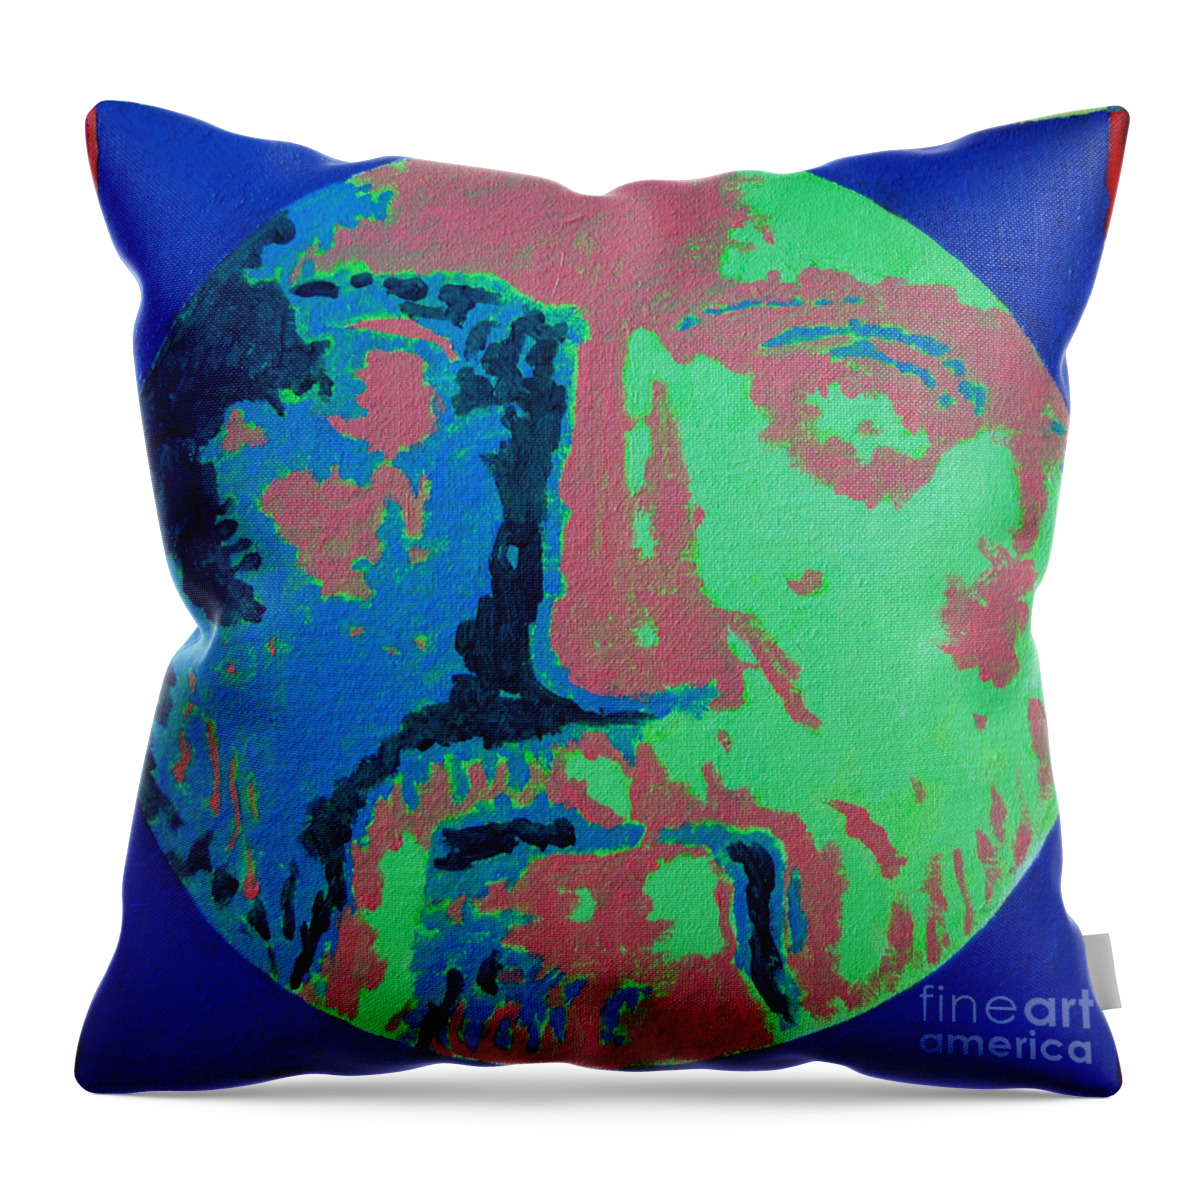 Philosopher Throw Pillow featuring the painting Philosopher - Pythagoras by Ana Maria Edulescu